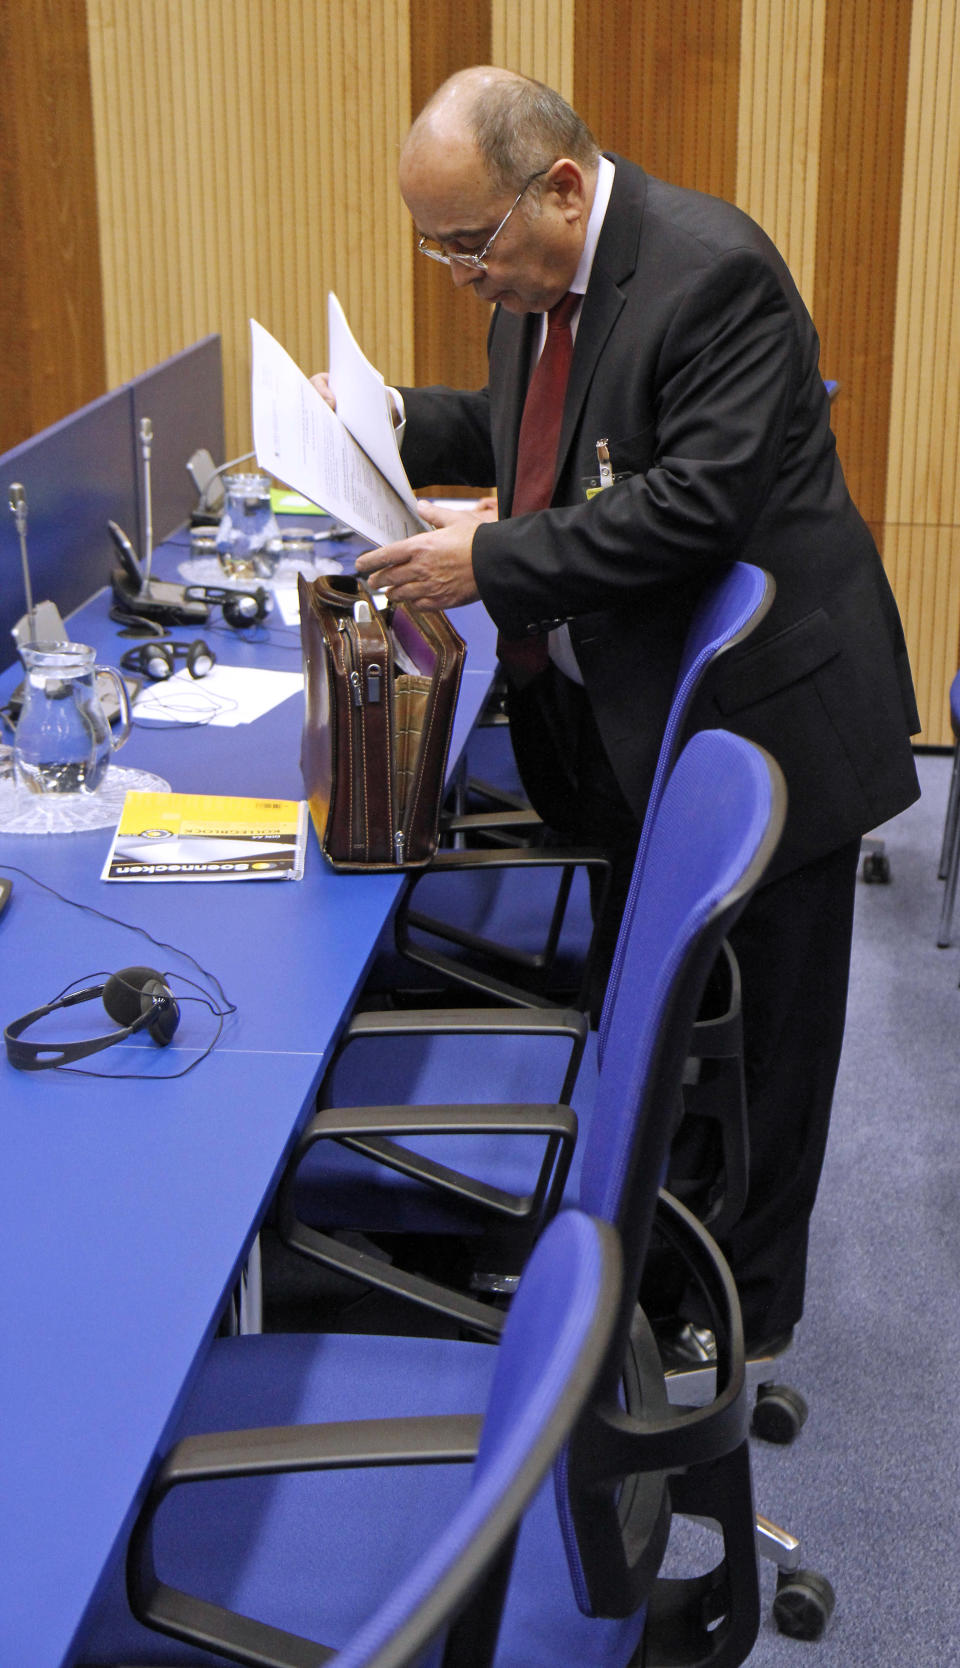 Israel's Ambassador to the International Atomic Energy Agency, IAEA, Ehud Azoulay prepares documentation for the IAEA board of governors meeting at the International Center, in Vienna, Austria, on Thursday, March 8, 2012. (AP Photo/Ronald Zak)